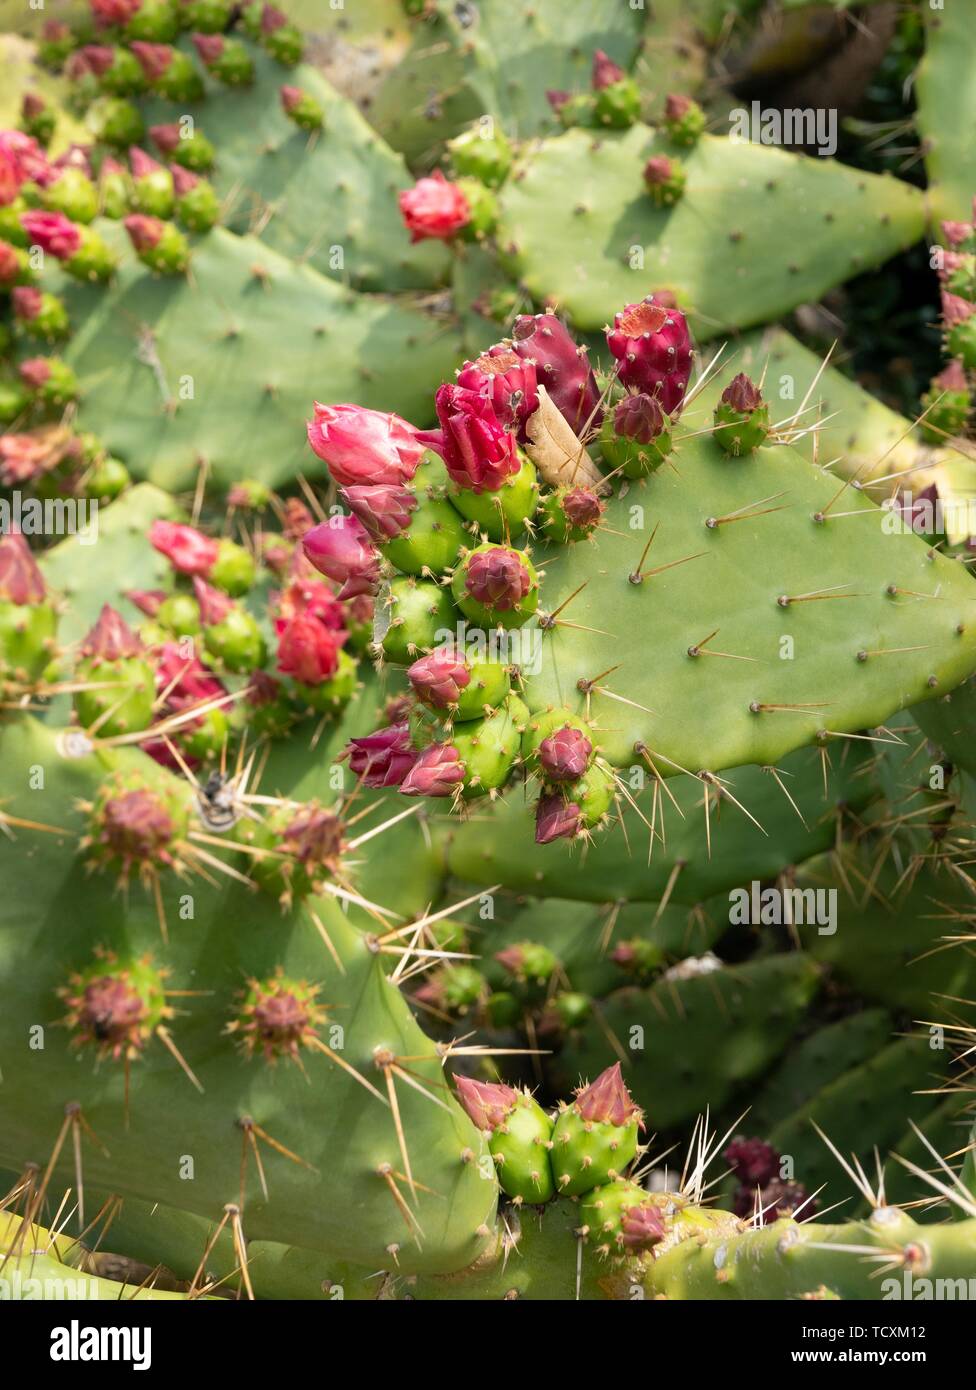 Opuntia, commonly called prickly pear, Stock Photo